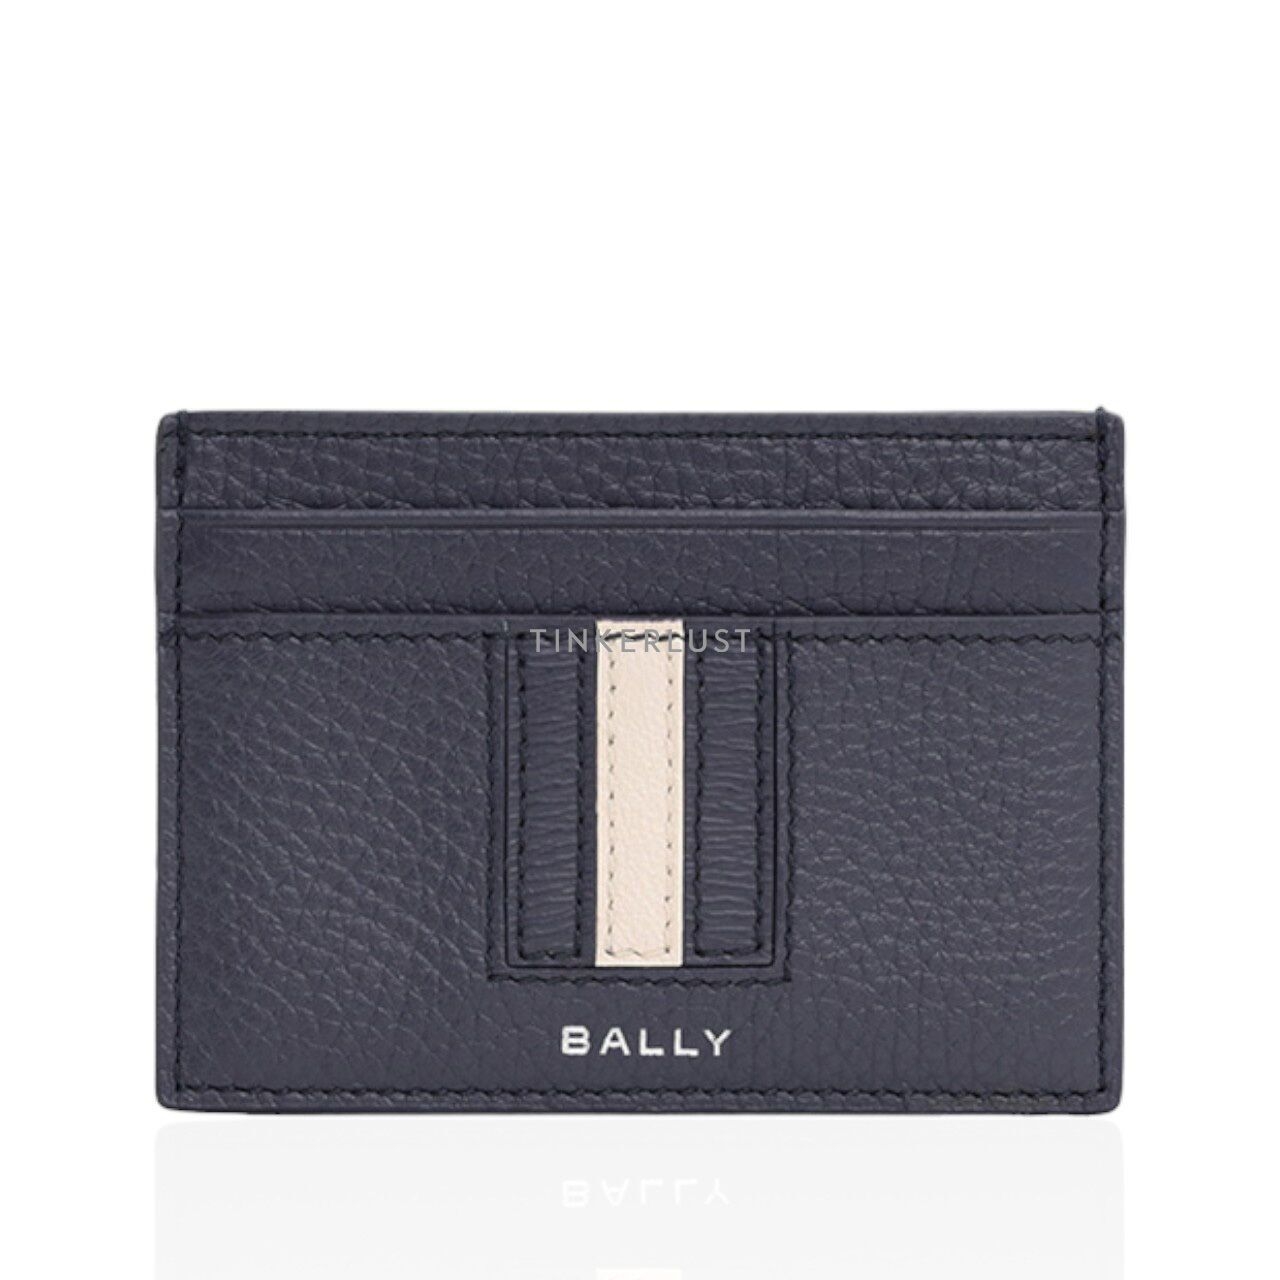 Bally Ribbon Card Holder in Midnight Blue Grained Leather Wallet